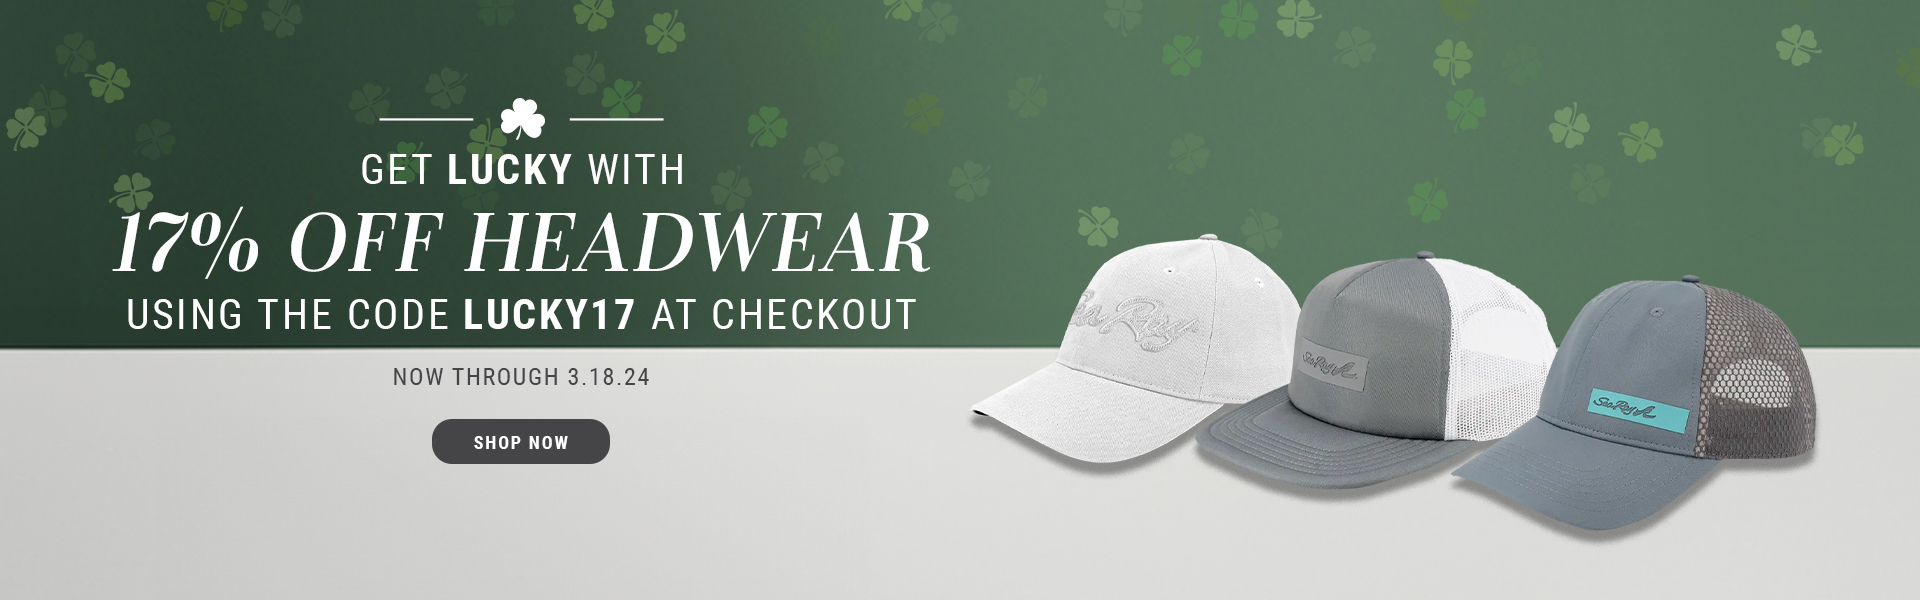 Get lucky with 17% off headwear using the code LUCKY17 at checkout. Now through 3.18.24